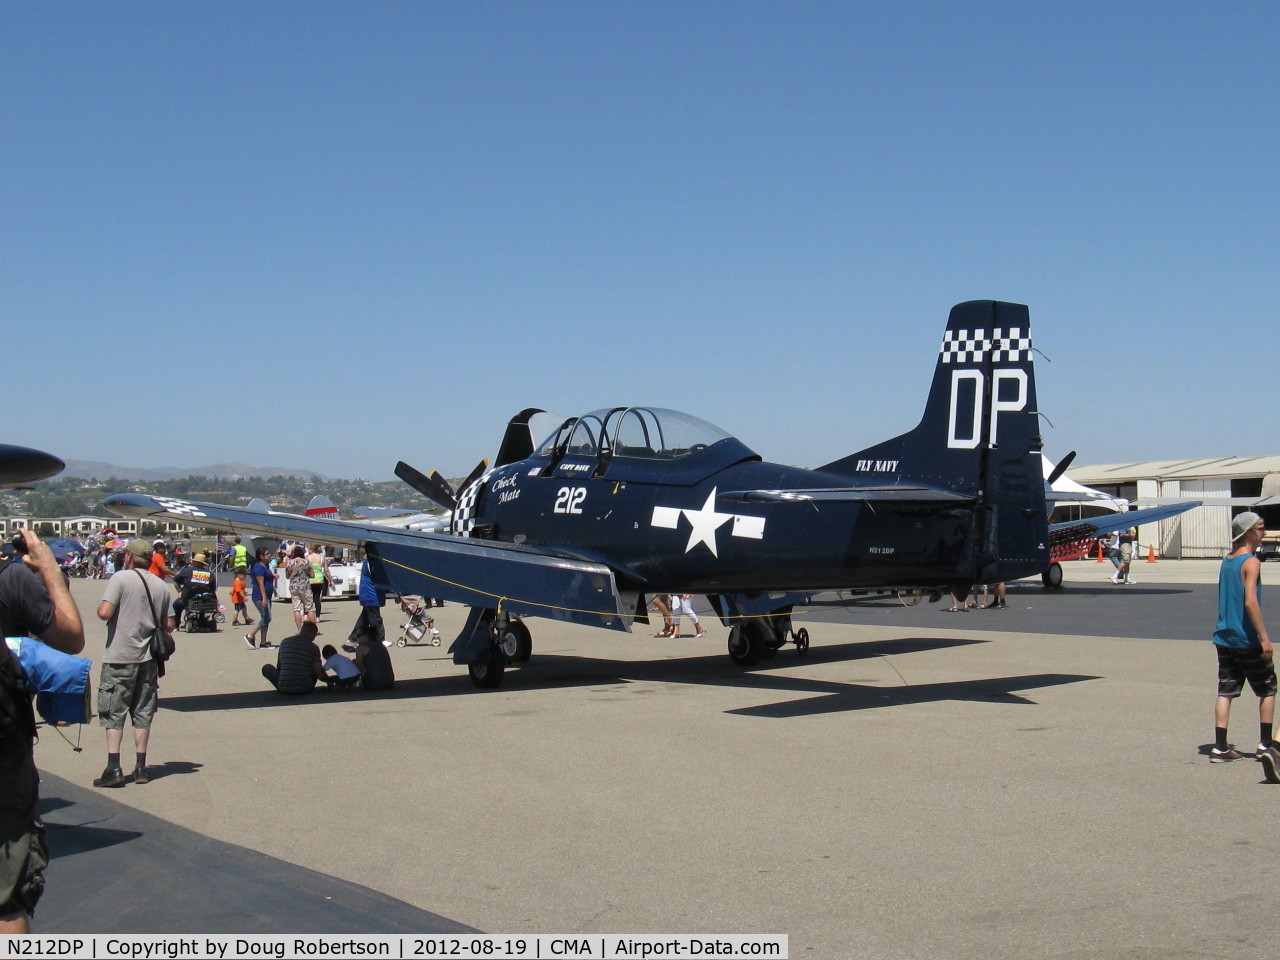 N212DP, 1949 North American T-28A Trojan C/N 159-128, 1949 North American T-28A TROJAN 'Checkmate', Wright R-1300 800 Hp, in Navy blue, unusual as USN rejected A model for higher horsepower & other changes in the -B, -C models.